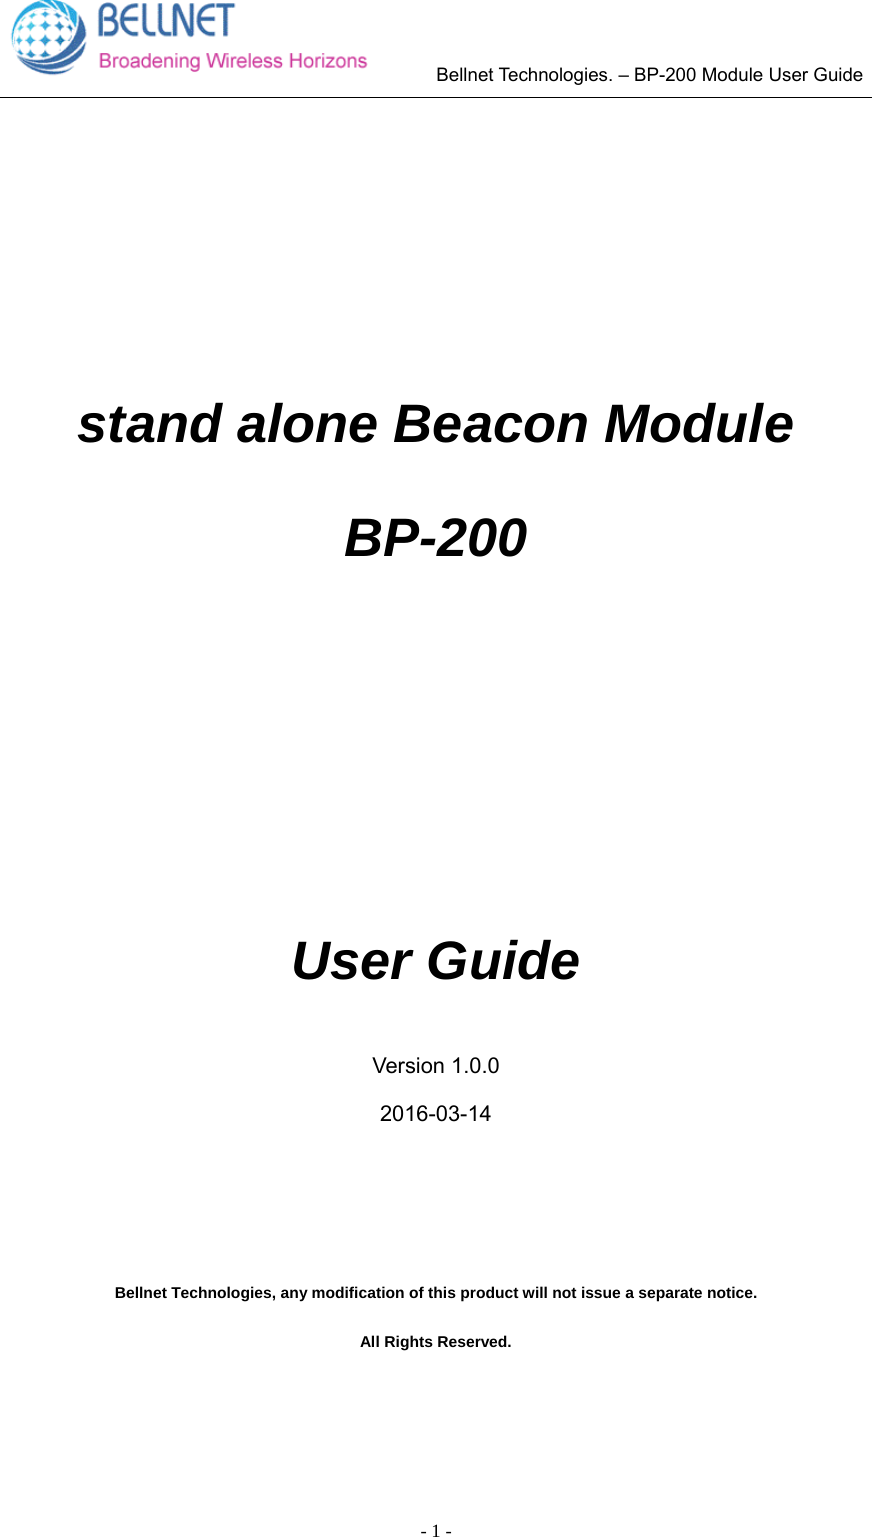        Bellnet Technologies. – BP-200 Module User Guide - 1 - stand alone Beacon Module BP-200 User Guide Version 1.0.0 2016-03-14 Bellnet Technologies, any modification of this product will not issue a separate notice. All Rights Reserved. 